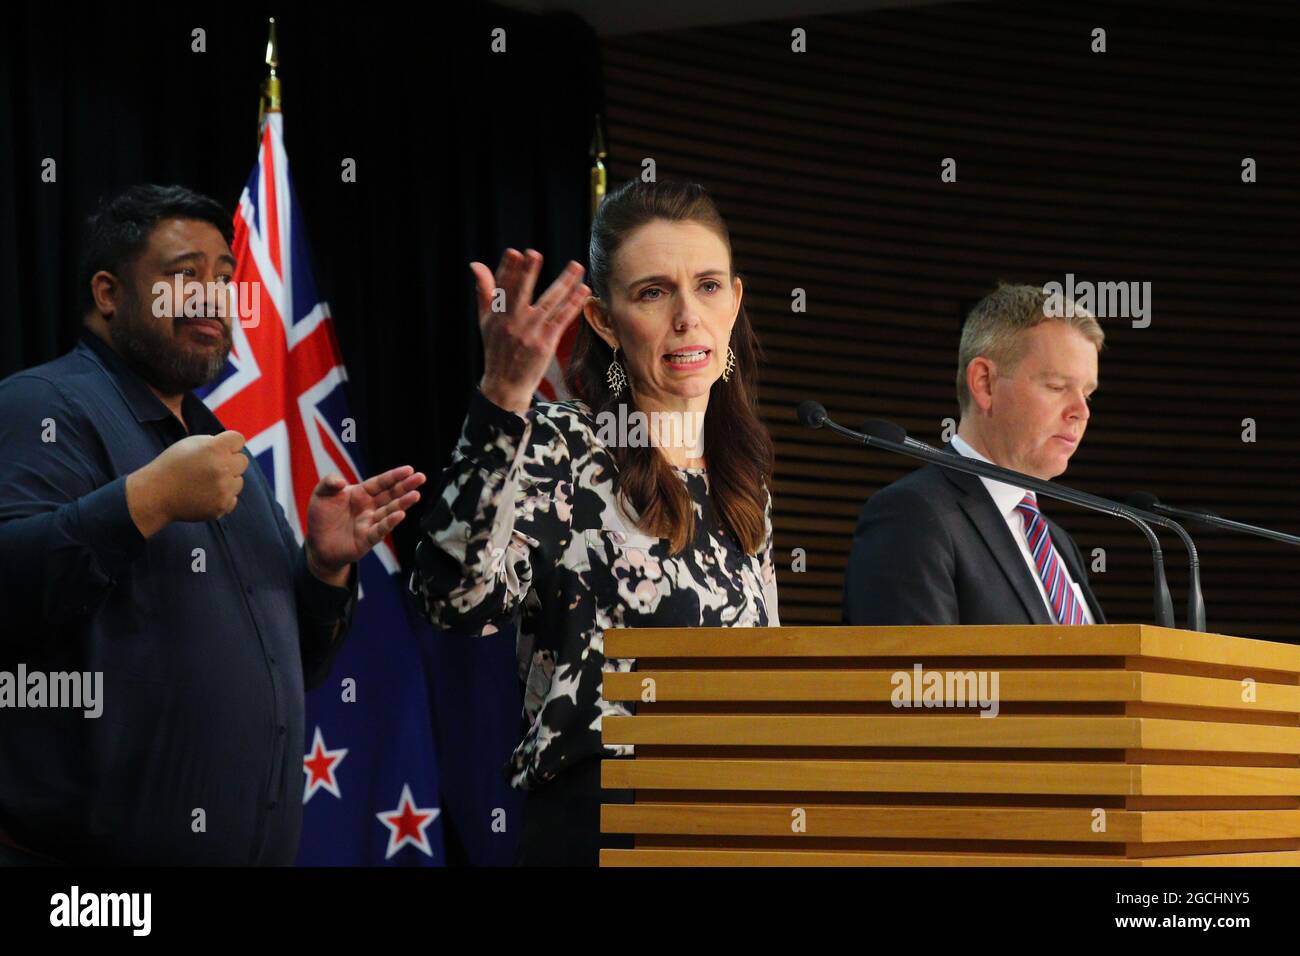 Wellington, New Zealand, 9 August 2021. New Zealand Prime Minister Jacinda Ardern, flanked by a sign language interpreter and Covid Response Minister Chris Hipkins (right) holds a press conference to discuss the exposure of unvaccinated port workers to crew infected with Covid-19 on board the Maersk cargo ship Rio de la Plata. Ardern expressed frustration over vaccine hesitancy related to online misinformation, and announced vaccination will be made mandatory for frontline port workers. Credit: Lynn Grieveson/Alamy Live News Stock Photo